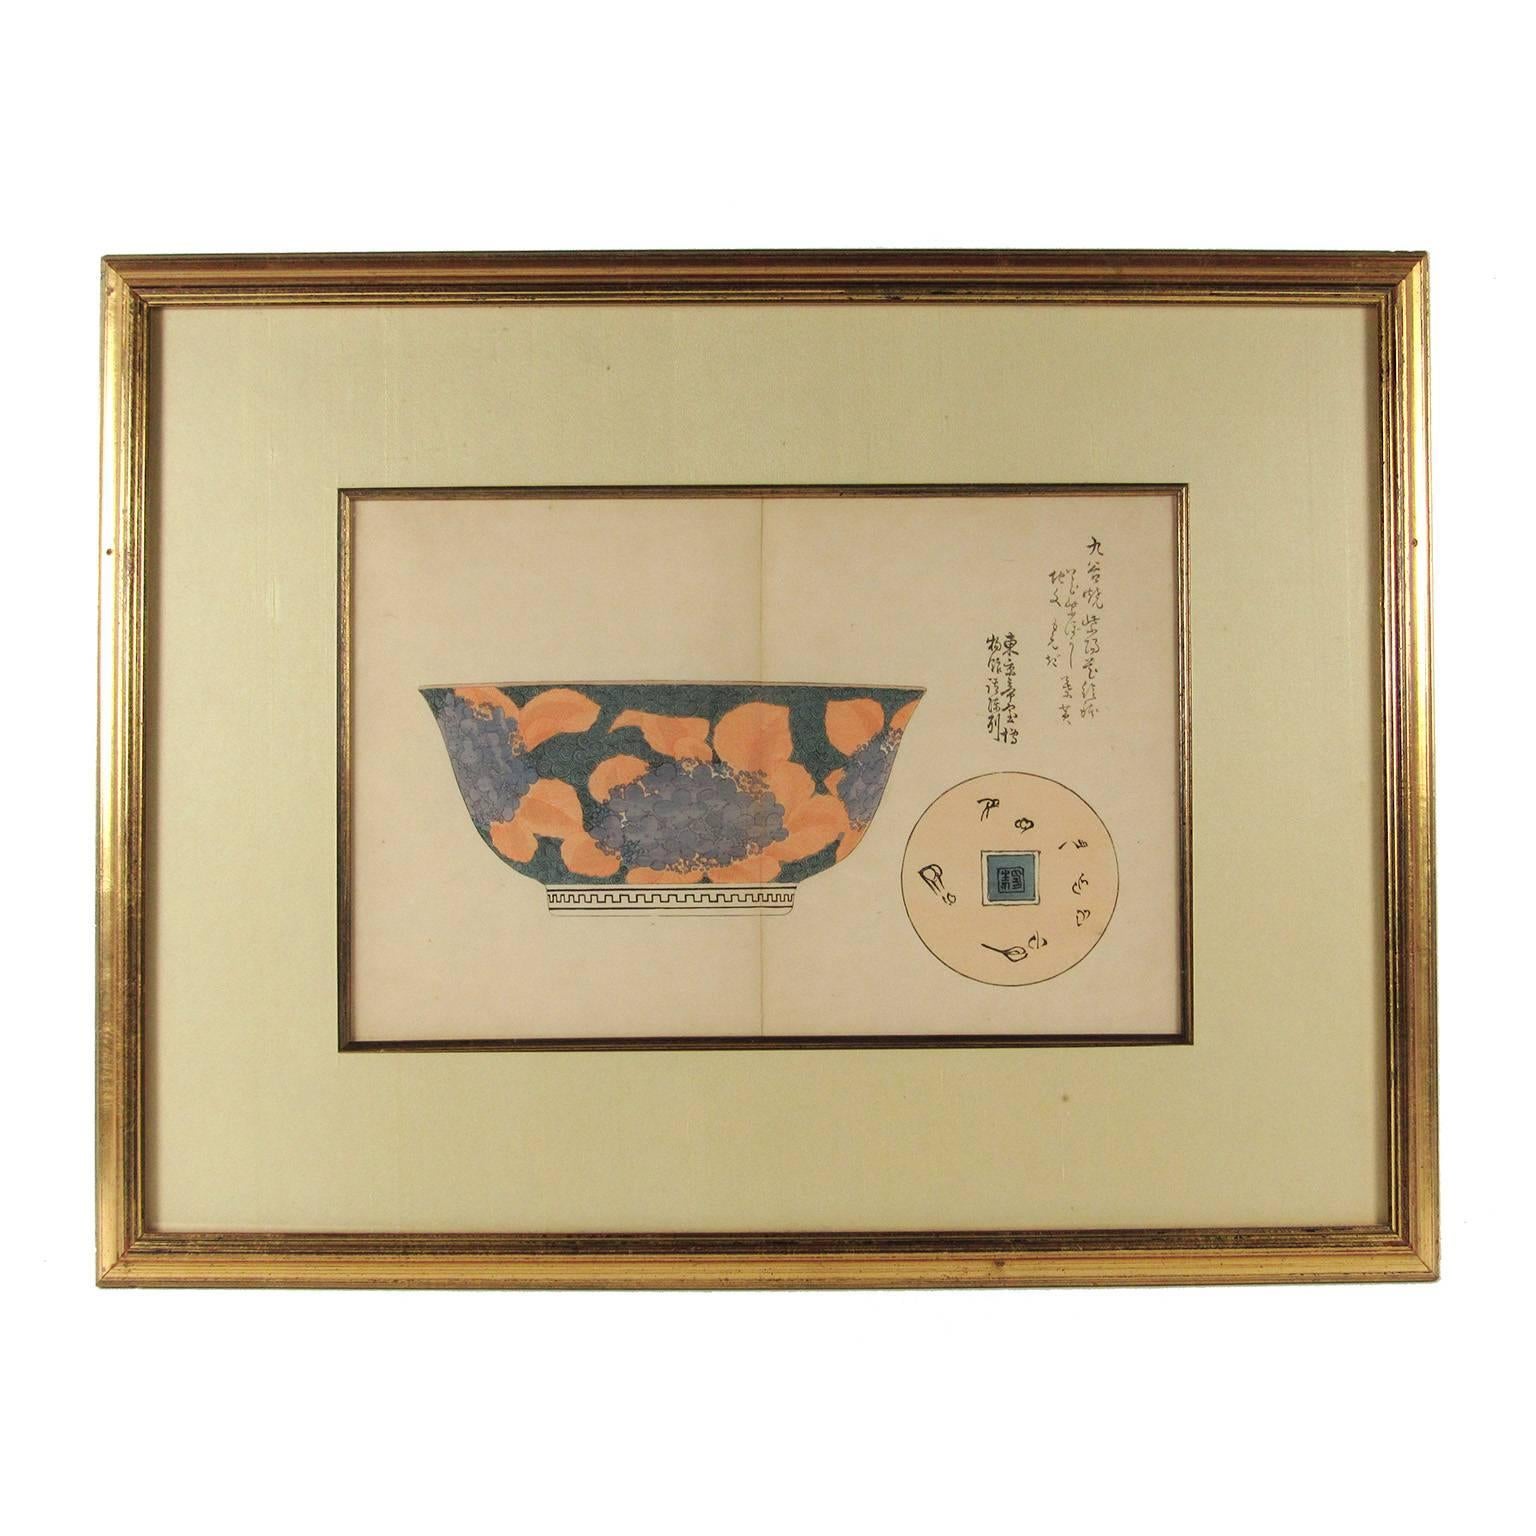 Set of two framed Japanese woodblock prints depicting porcelain designs, with calligraphic inscriptions, late 19th century. Likely book plates from a book on Japanese porcelain designs. 
Sight: 9 x 13 1/2 inches; housed in matching giltwood frames,